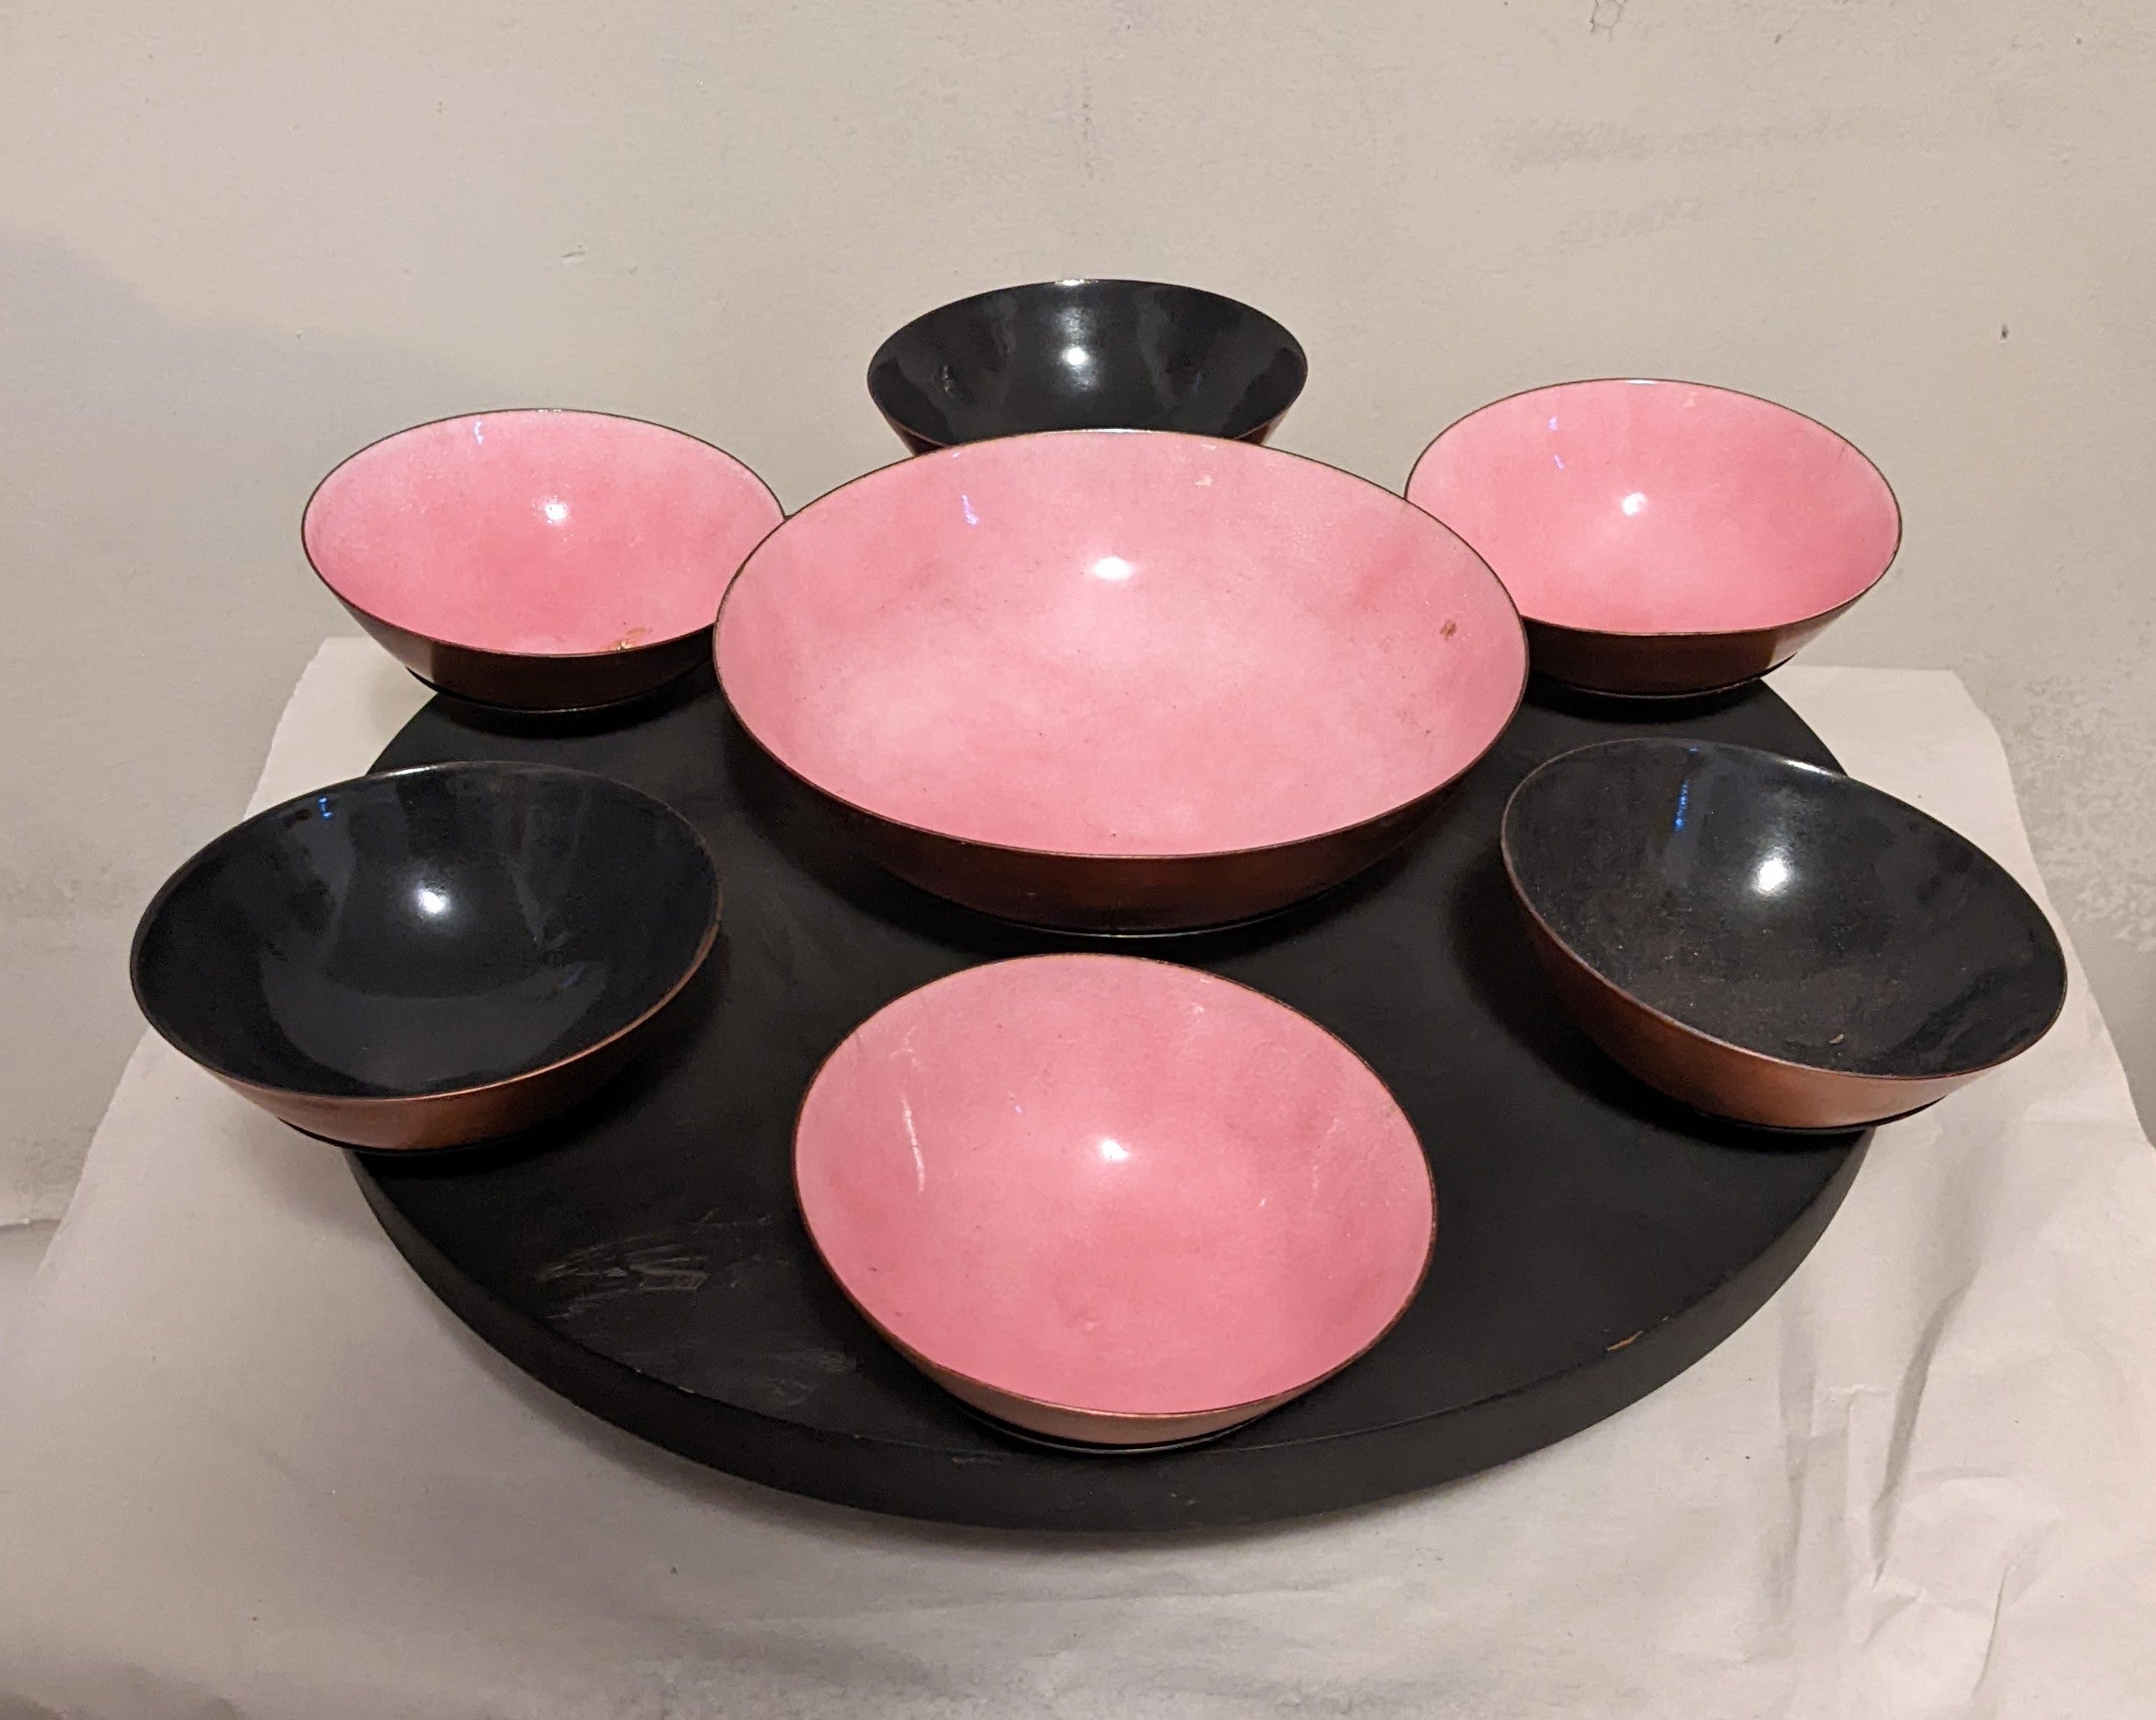 California modern handmade Mid-Century Modern Lazy Susan server of wood with enameled copper bowls in vibrant pink and black by Marrell. Bowls sit on a hand made wood base with ball bearings in base as turning mechanism. As it is hand made, its not